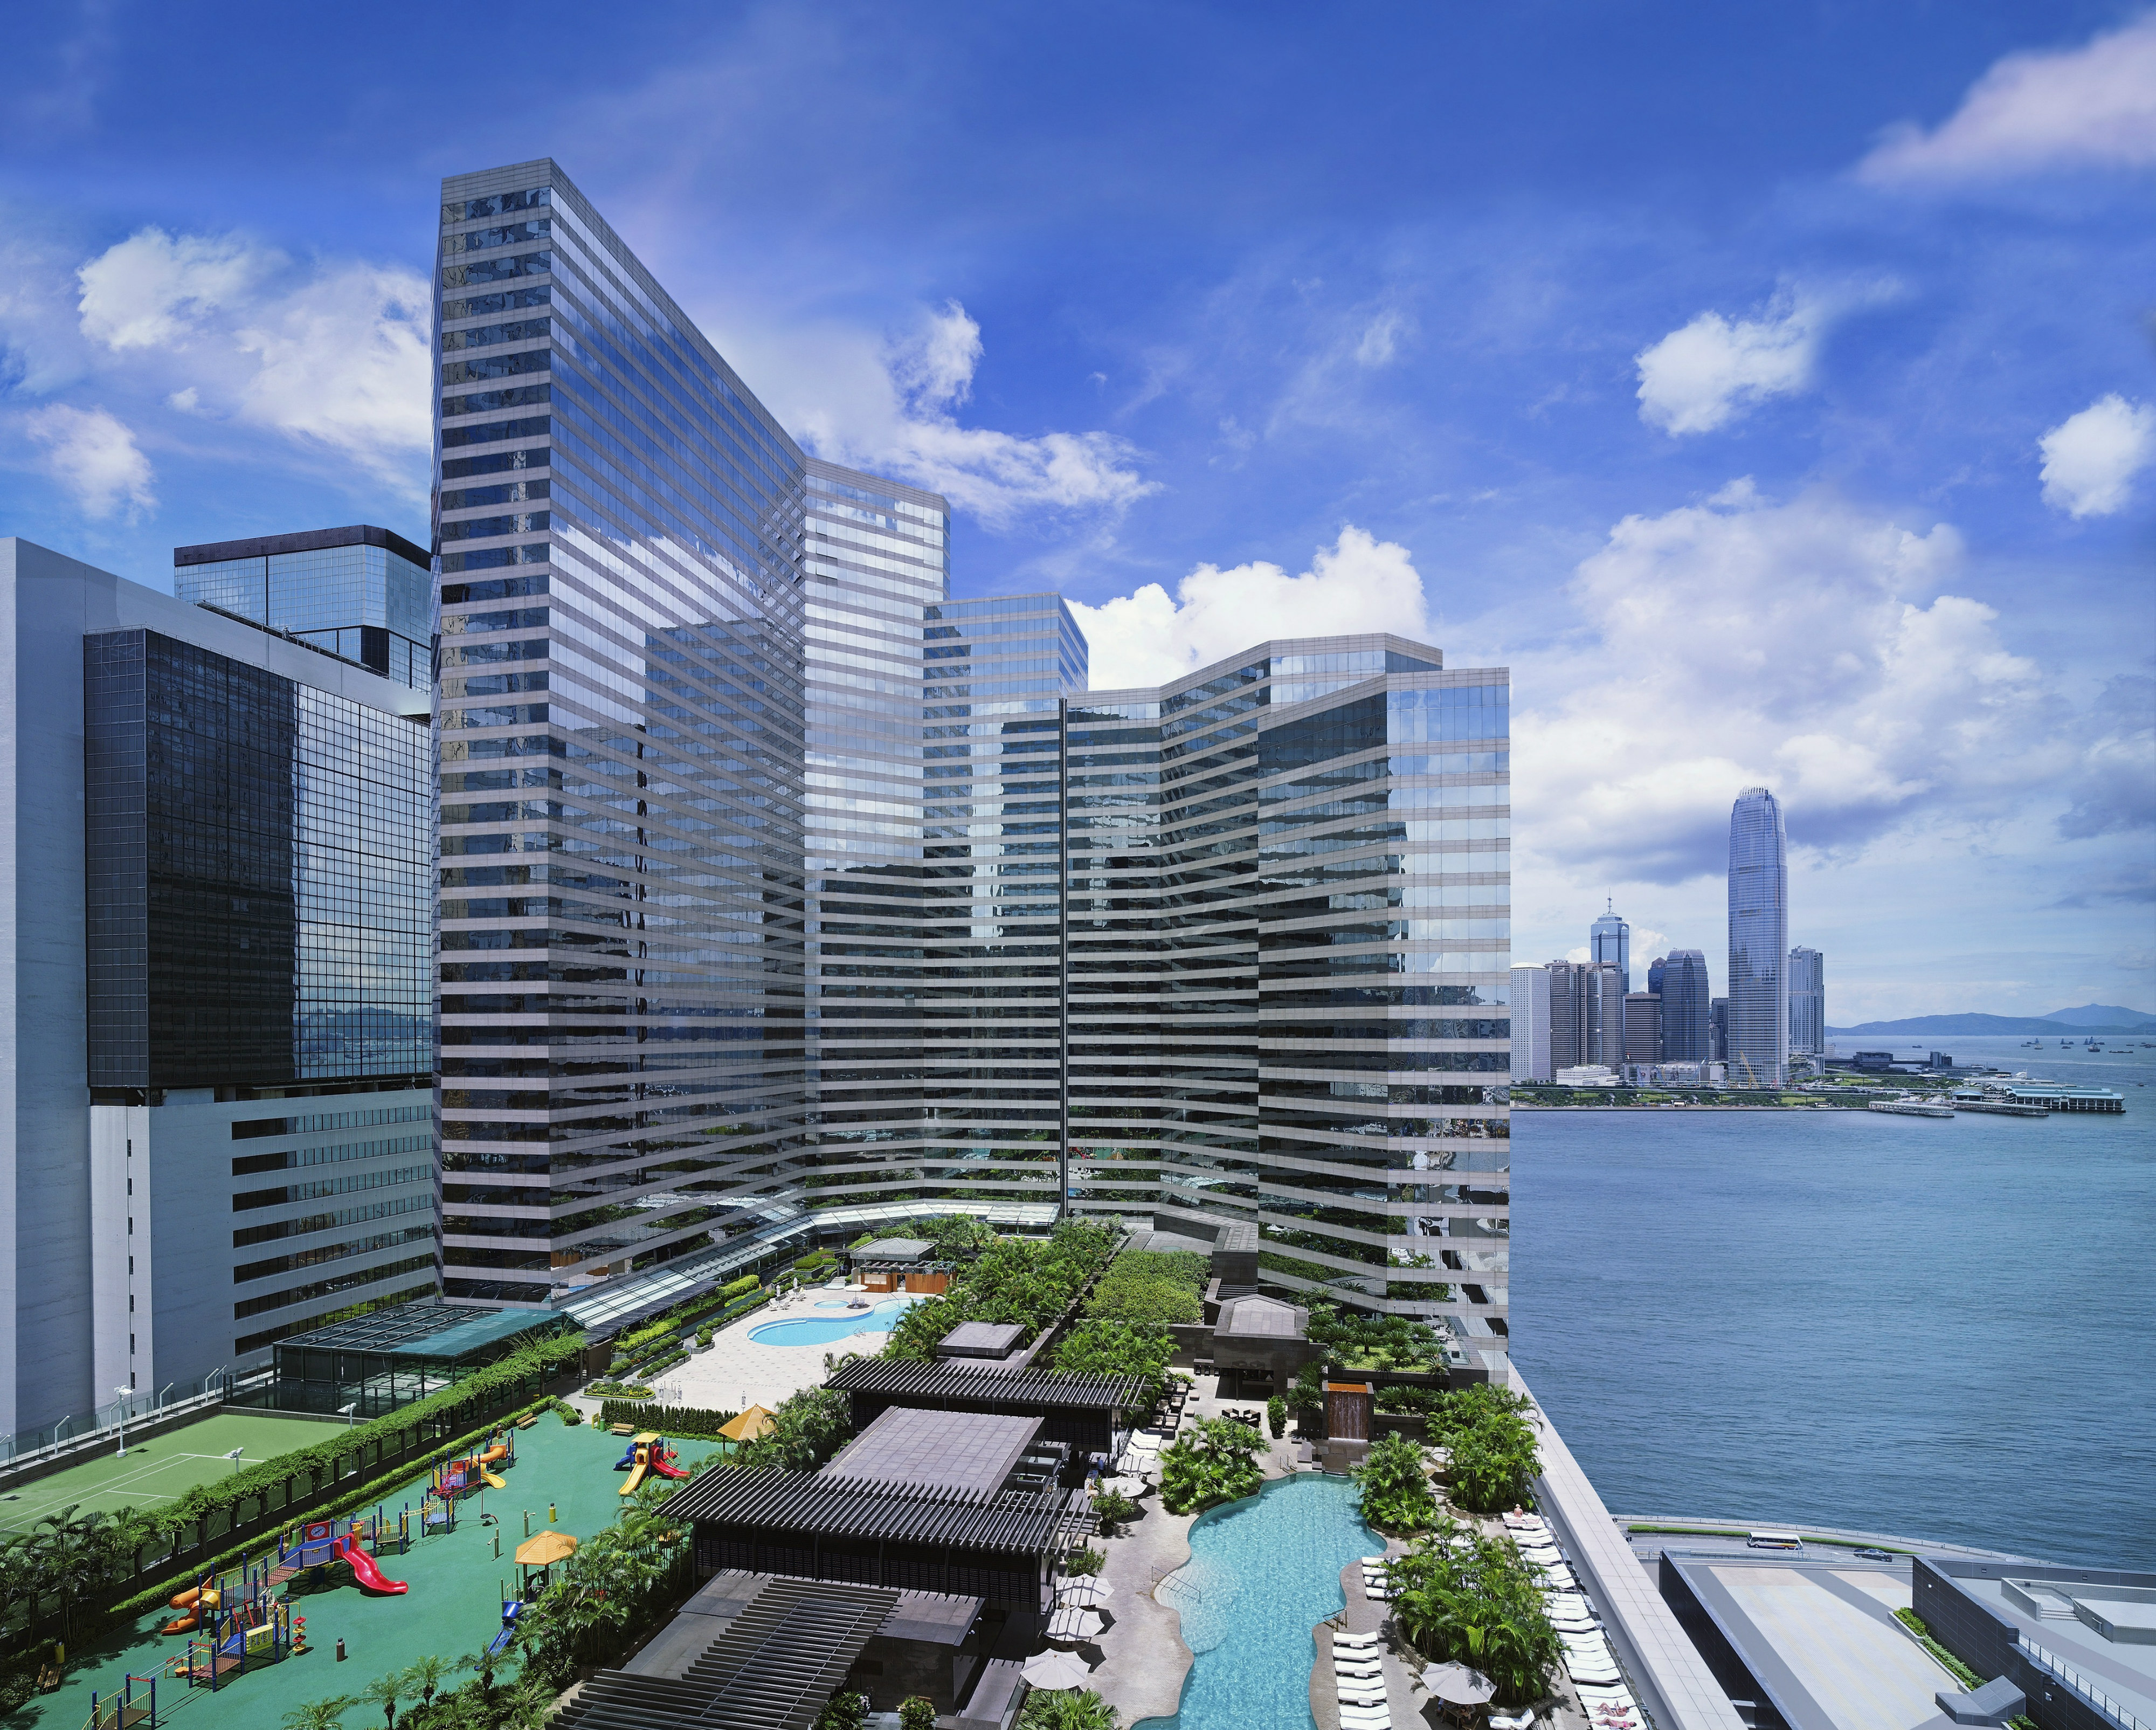 The 13th-annual Global Wellness Summit will take place at Grand Hyatt Hong Kong, a pioneering hotel in celebrating wellness and promoting quality of life while traveling, on October 15–17, 2019.